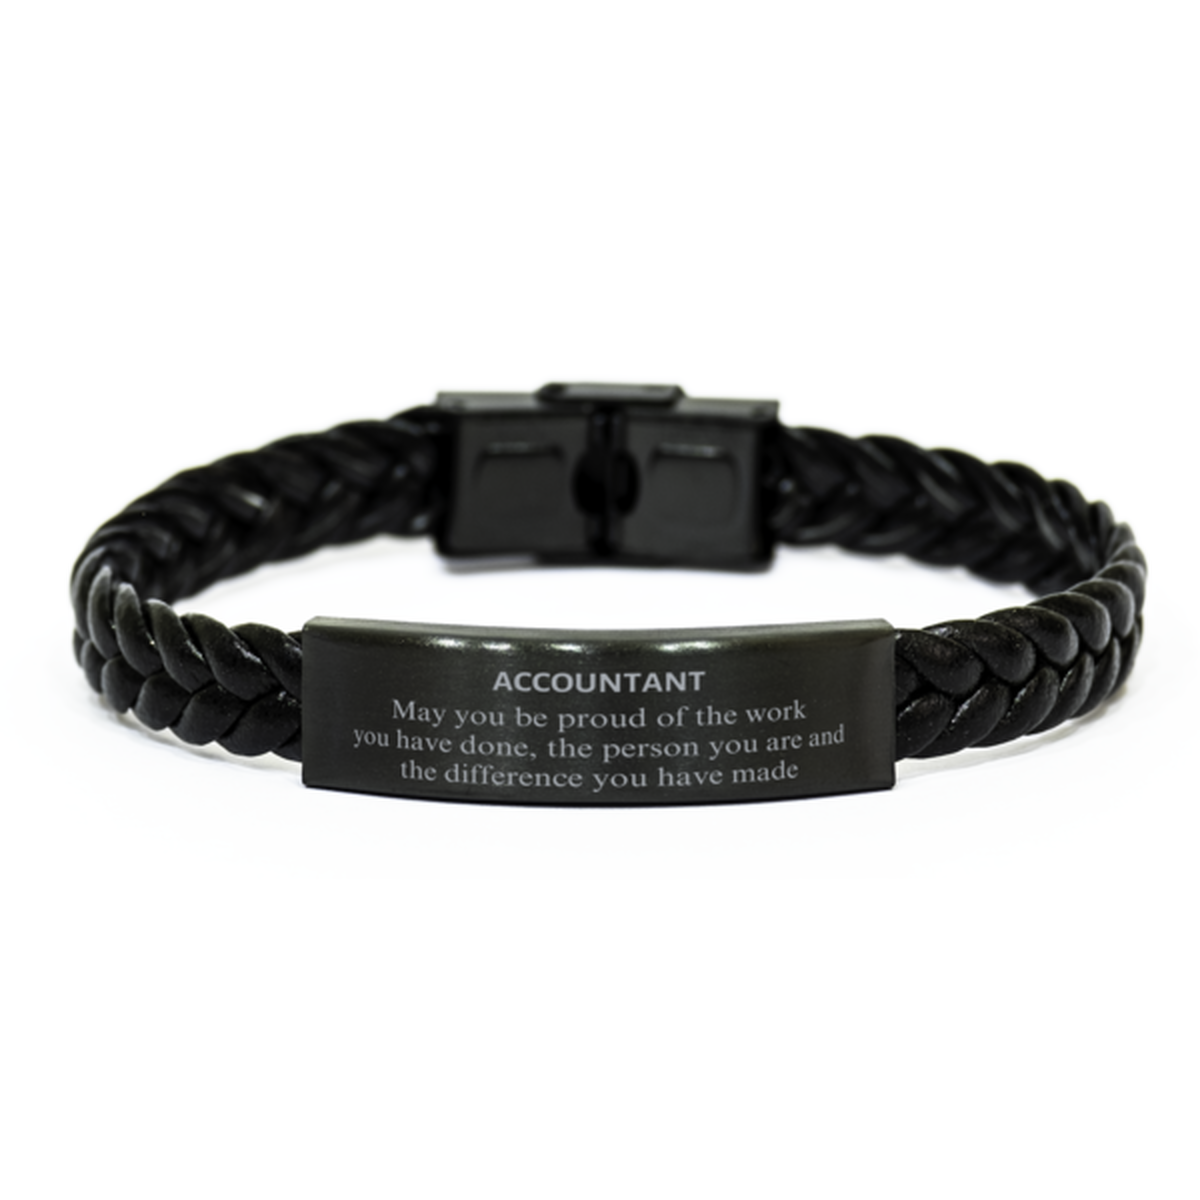 Accountant May you be proud of the work you have done, Retirement Accountant Braided Leather Bracelet for Colleague Appreciation Gifts Amazing for Accountant